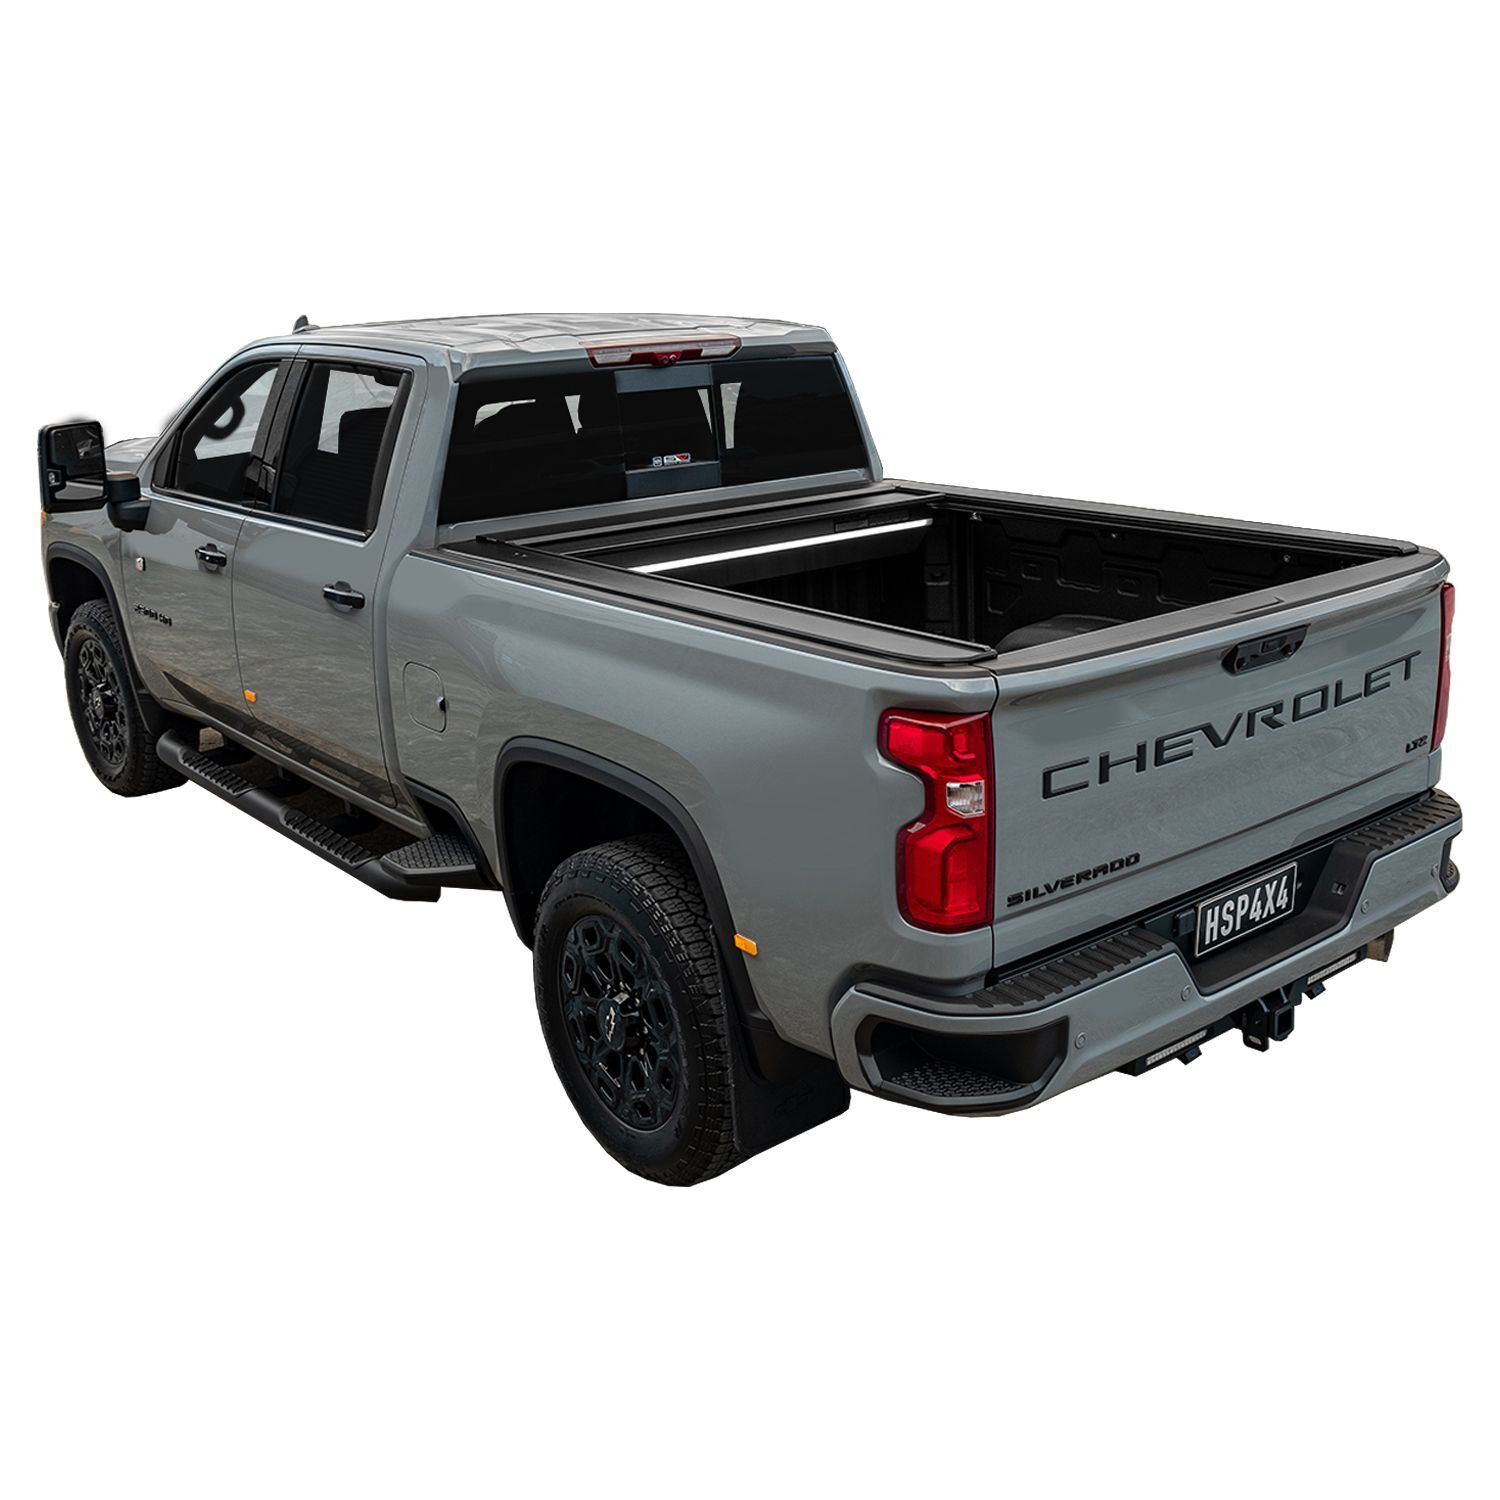 HSP ROLL R COVER TO SUIT CHEVROLET SILVERADO 2500